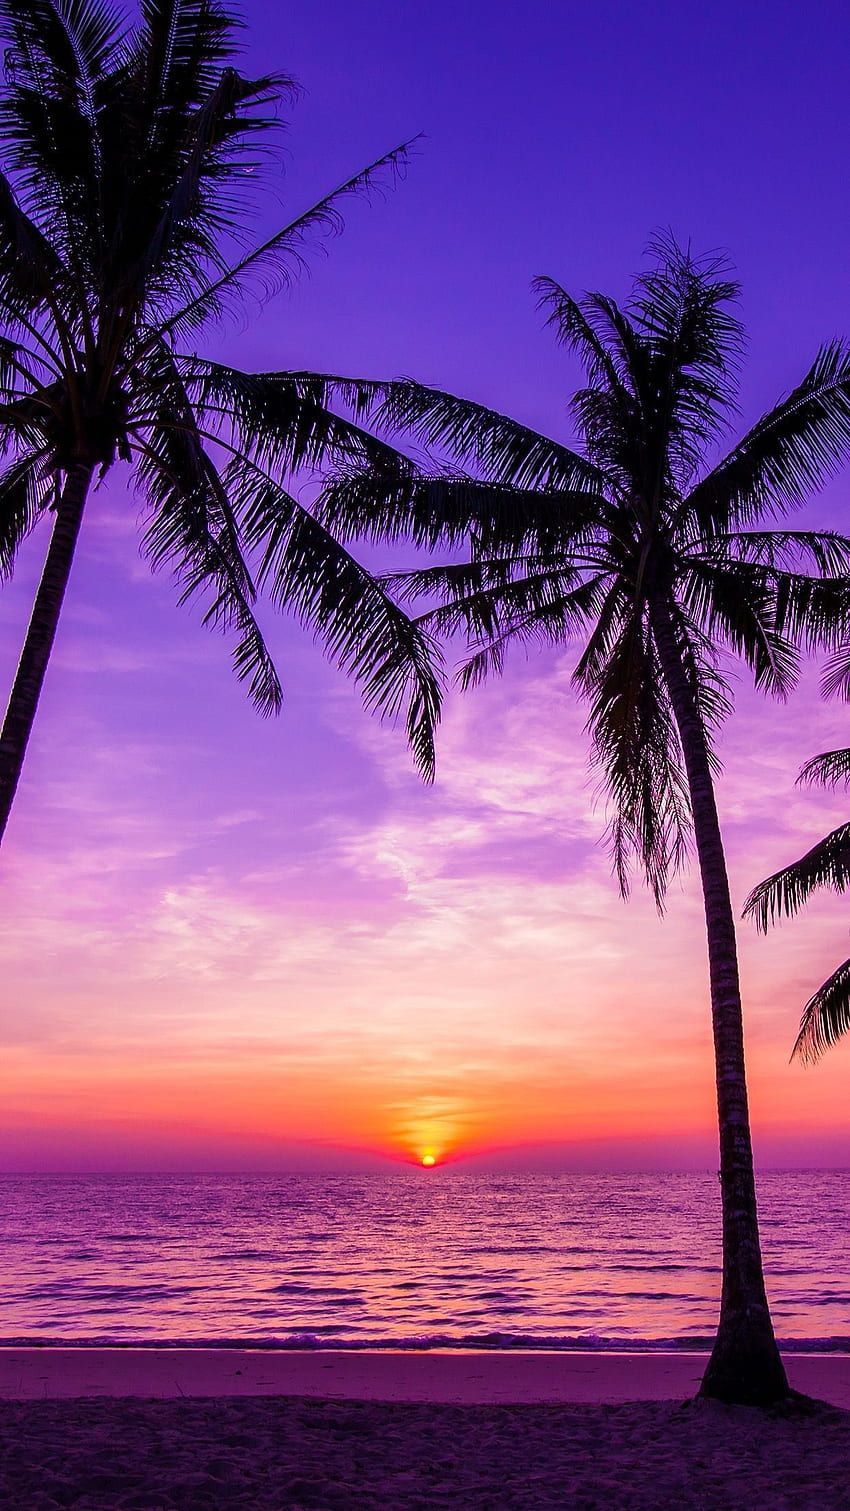 A sunset over the ocean with palm trees - Tropical, Hawaii